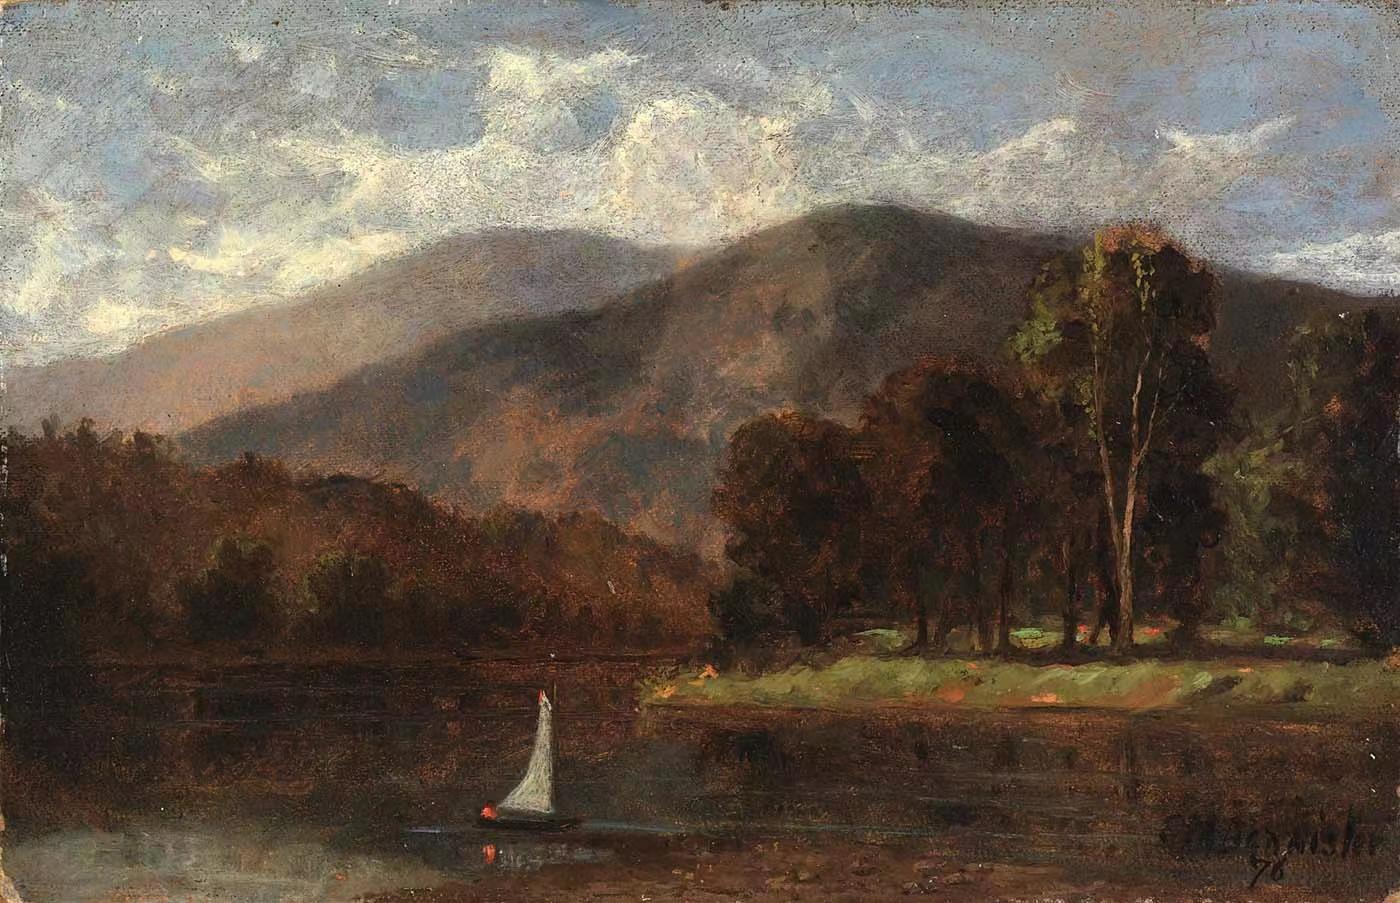 sailboat in river,Edward Mitchell Bannister,1828-1901